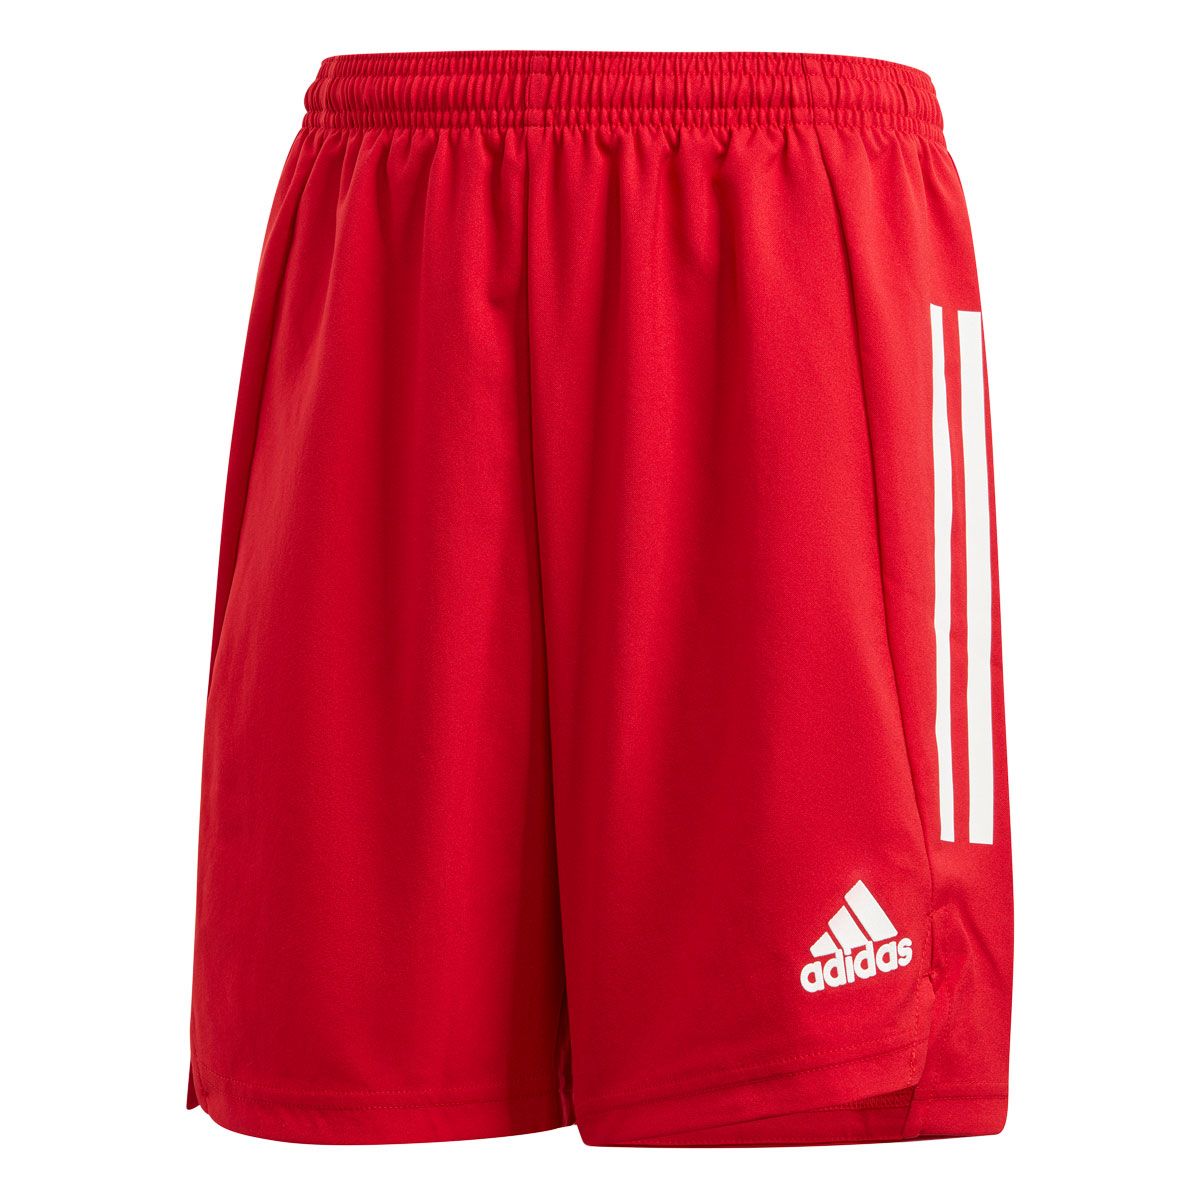 adidas Condivo 21 Youth Soccer Shorts, Assorted Colors